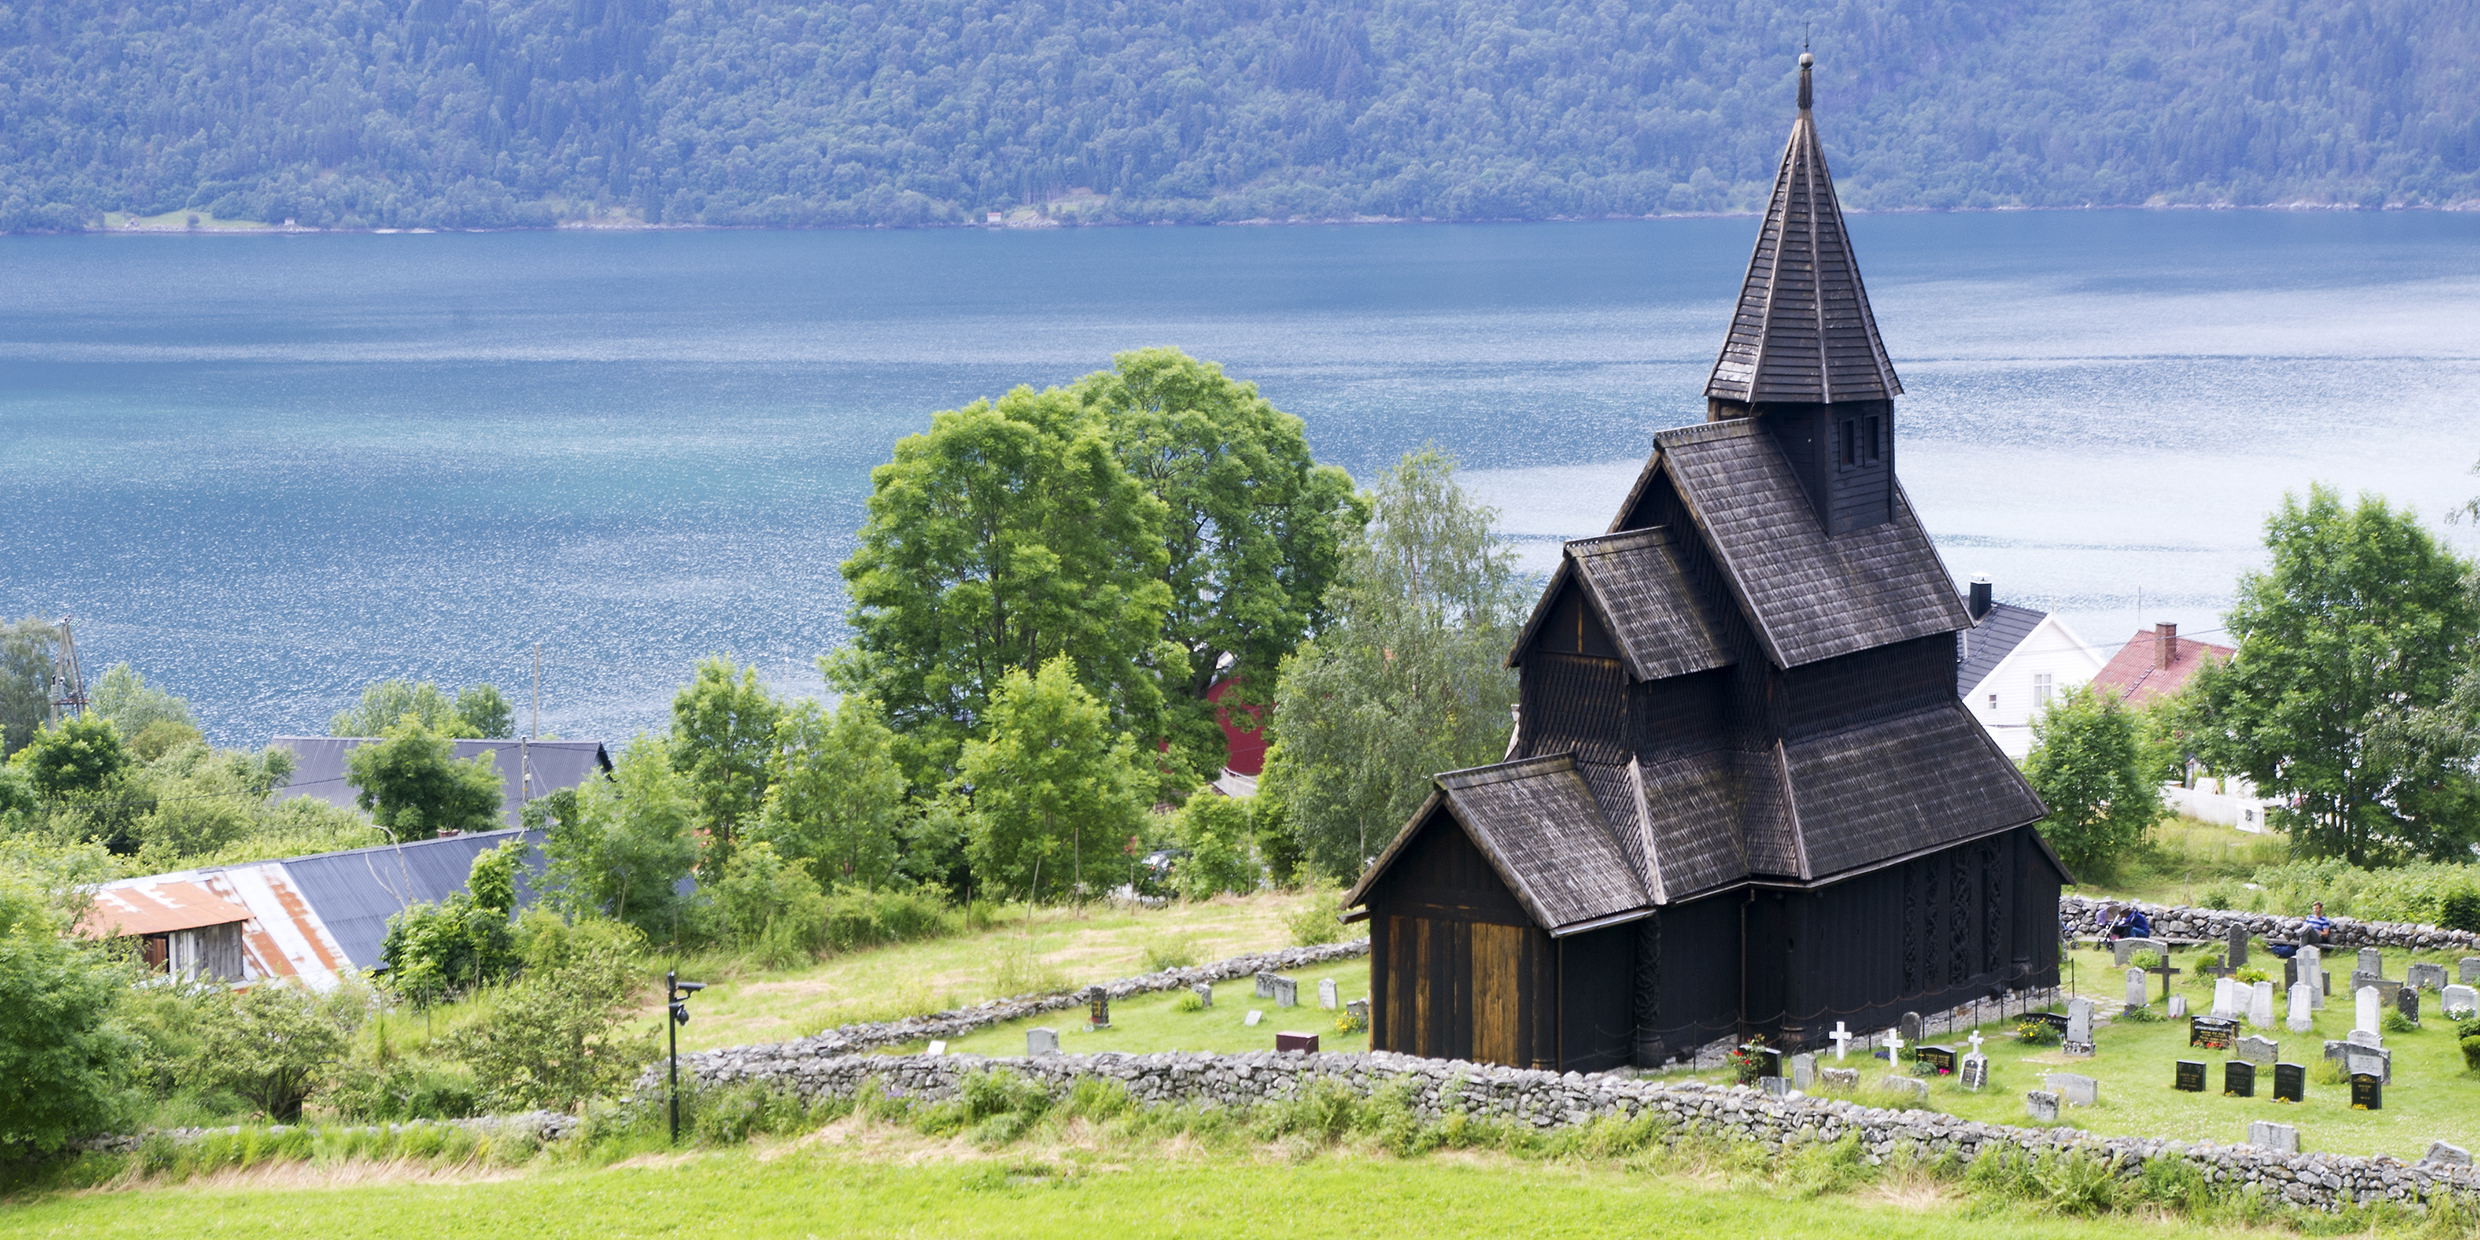 Image of a medieval stave church beside a fjord in Norway